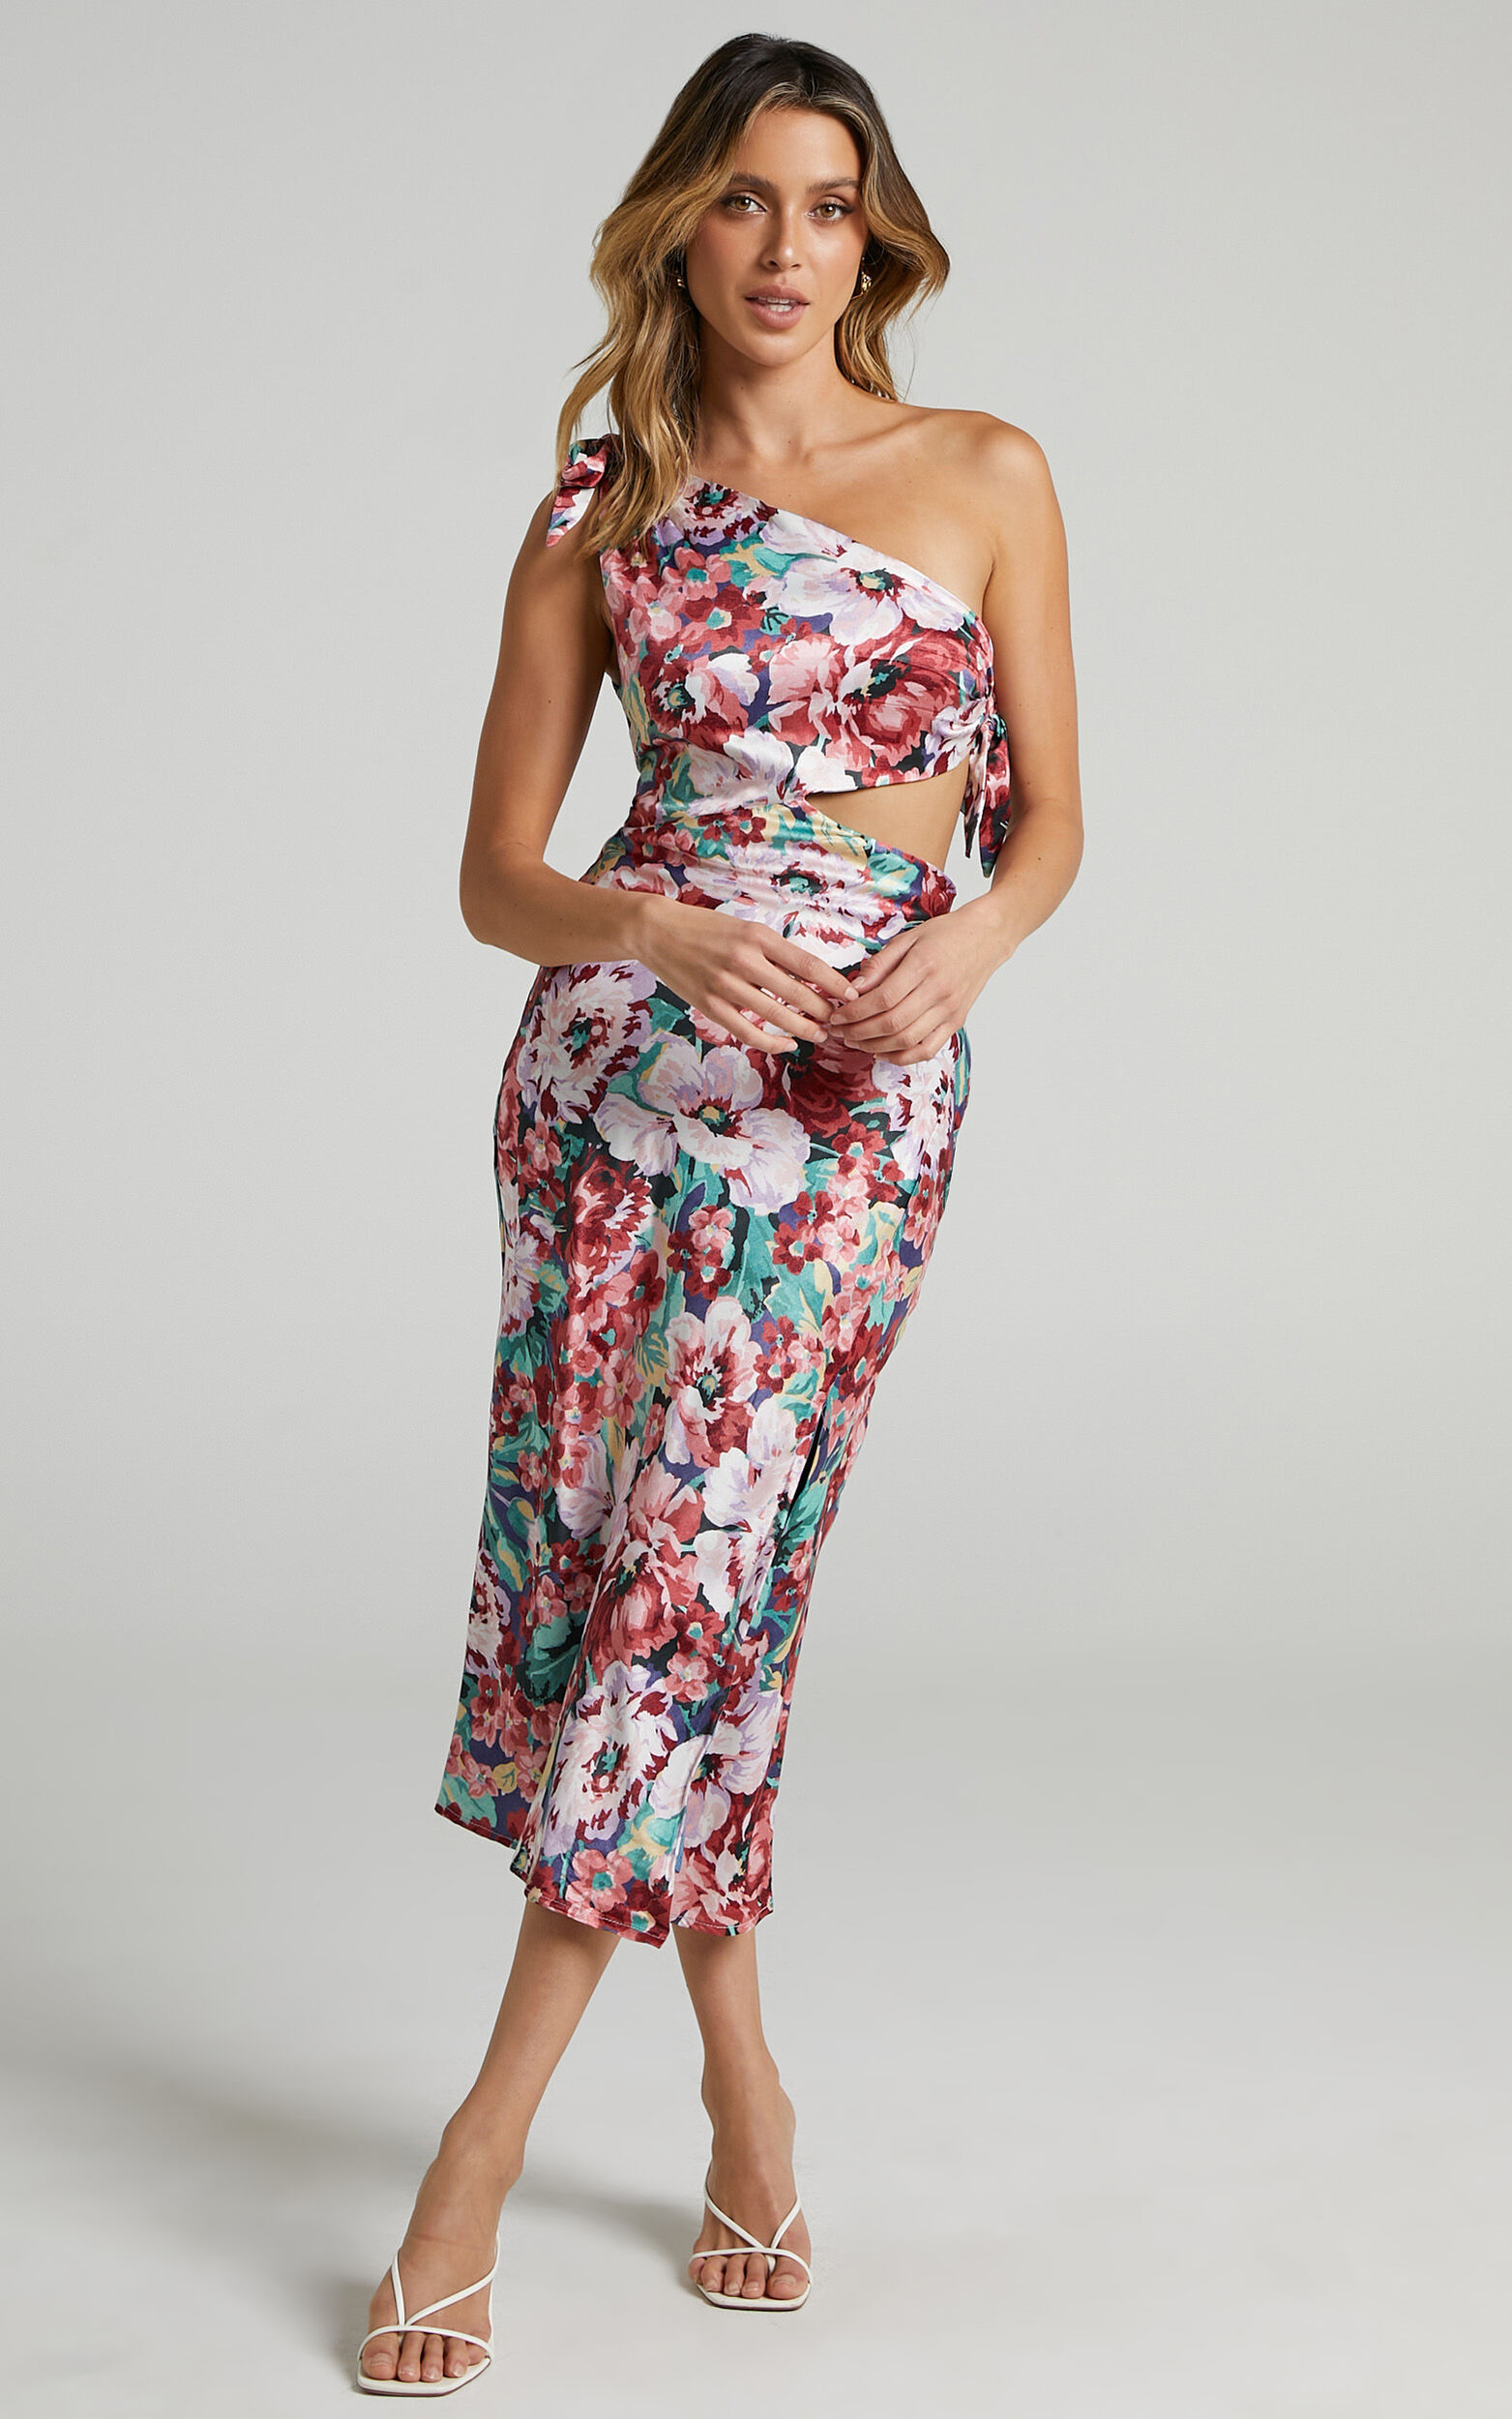 Glaucus One Shoulder Midi Dress in Amorous Floral | Showpo USA